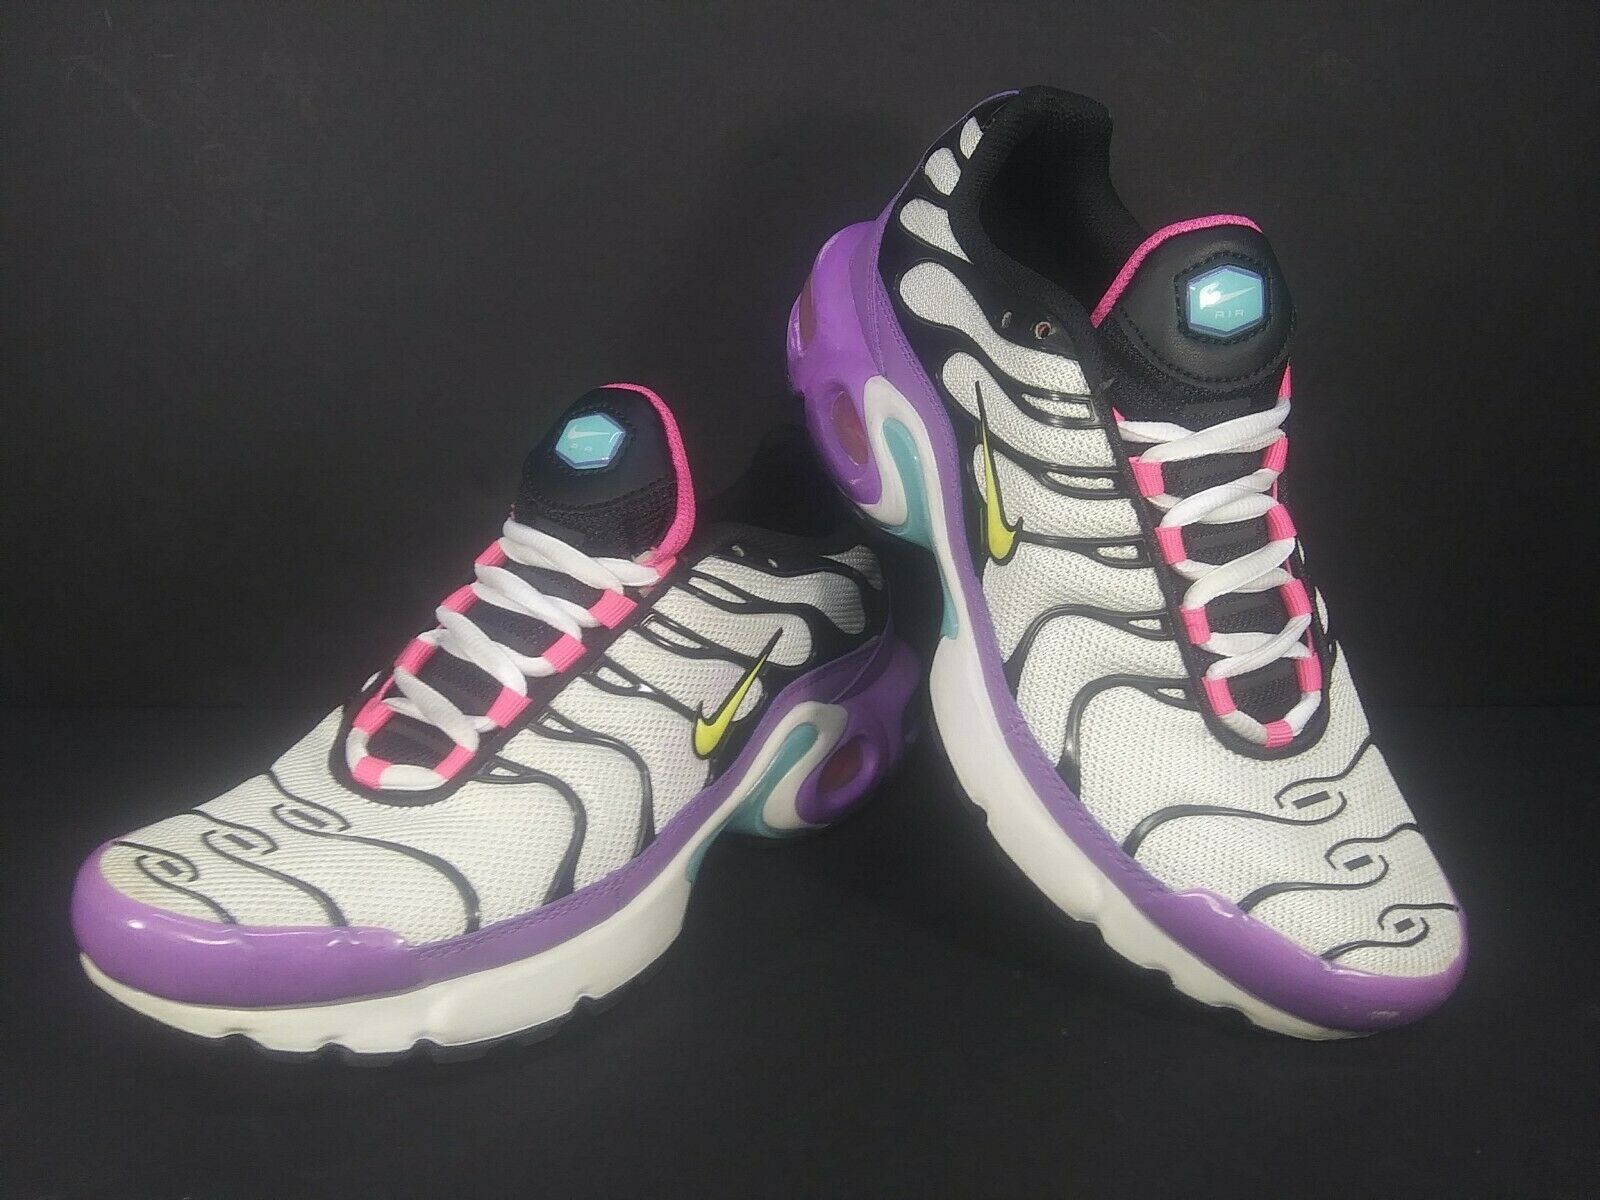 Nike Air Max 'Bright Violet' Size 6Y Shoes CQ9979-100 Multi Colored